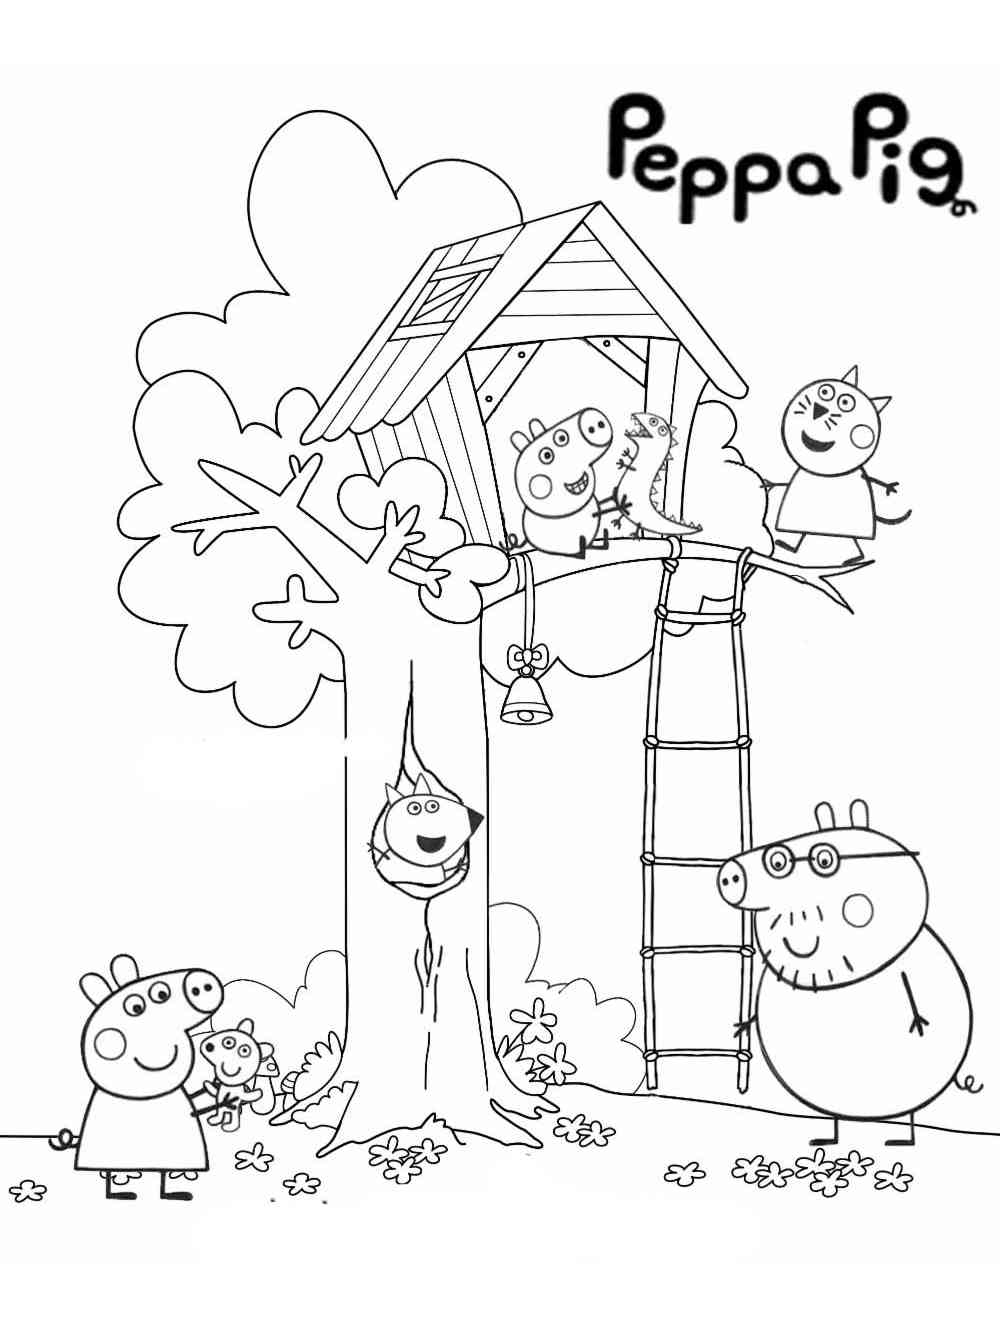 peppa pig coloring pages free printable peppa pig coloring pages